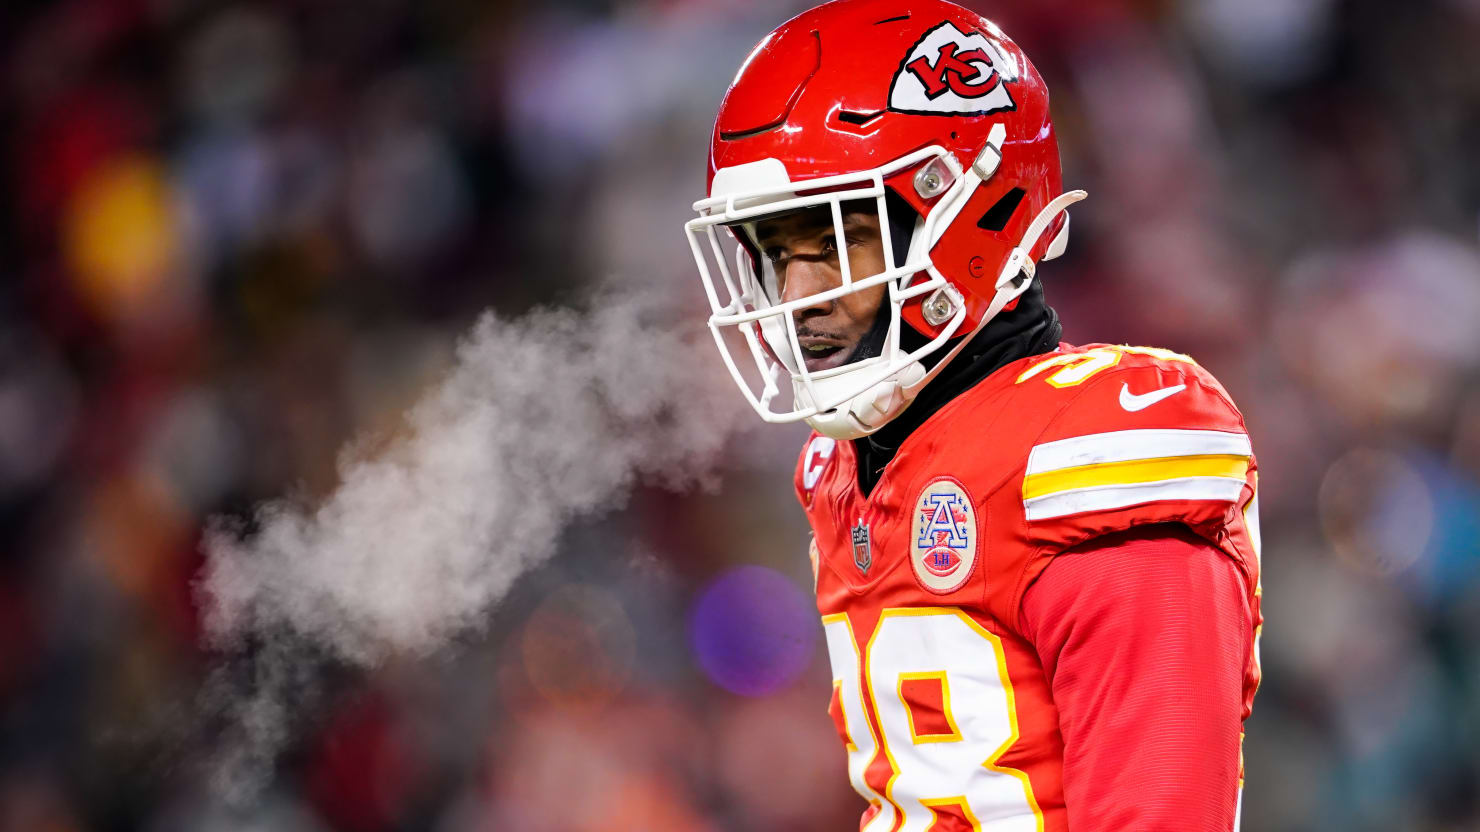 NFL Fans Underwent Amputations After Frigid Chiefs’ Game in January